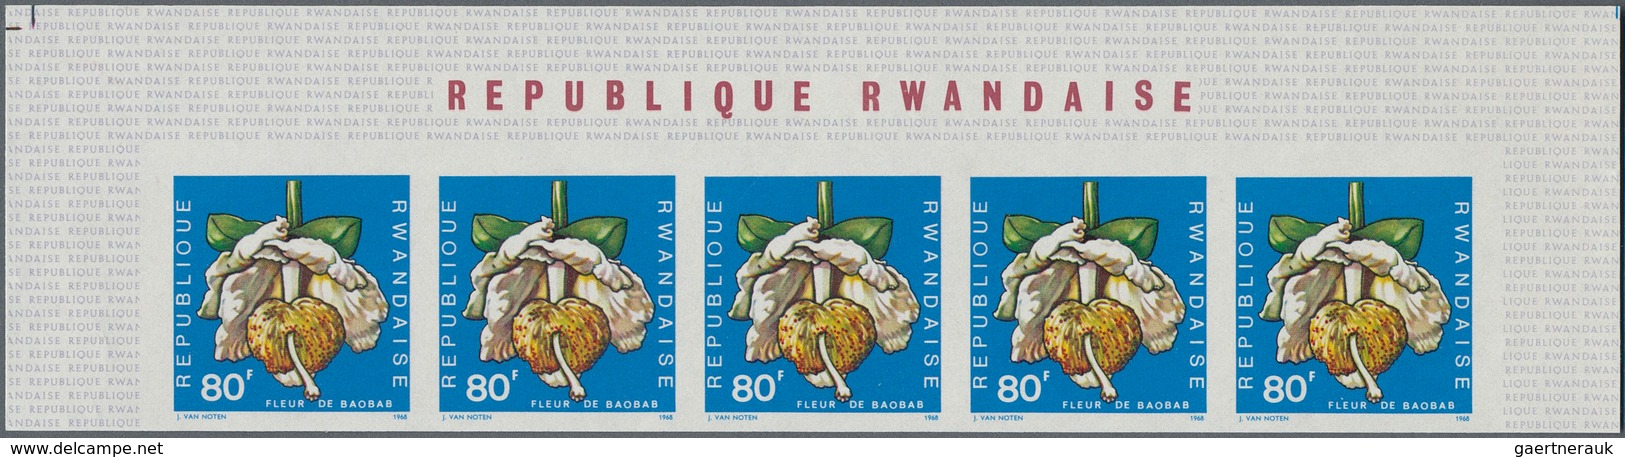 Ruanda: 1967/1975. Lot of 13,519 IMPERFORATE stamps, souvenir and miniature sheets showing various i